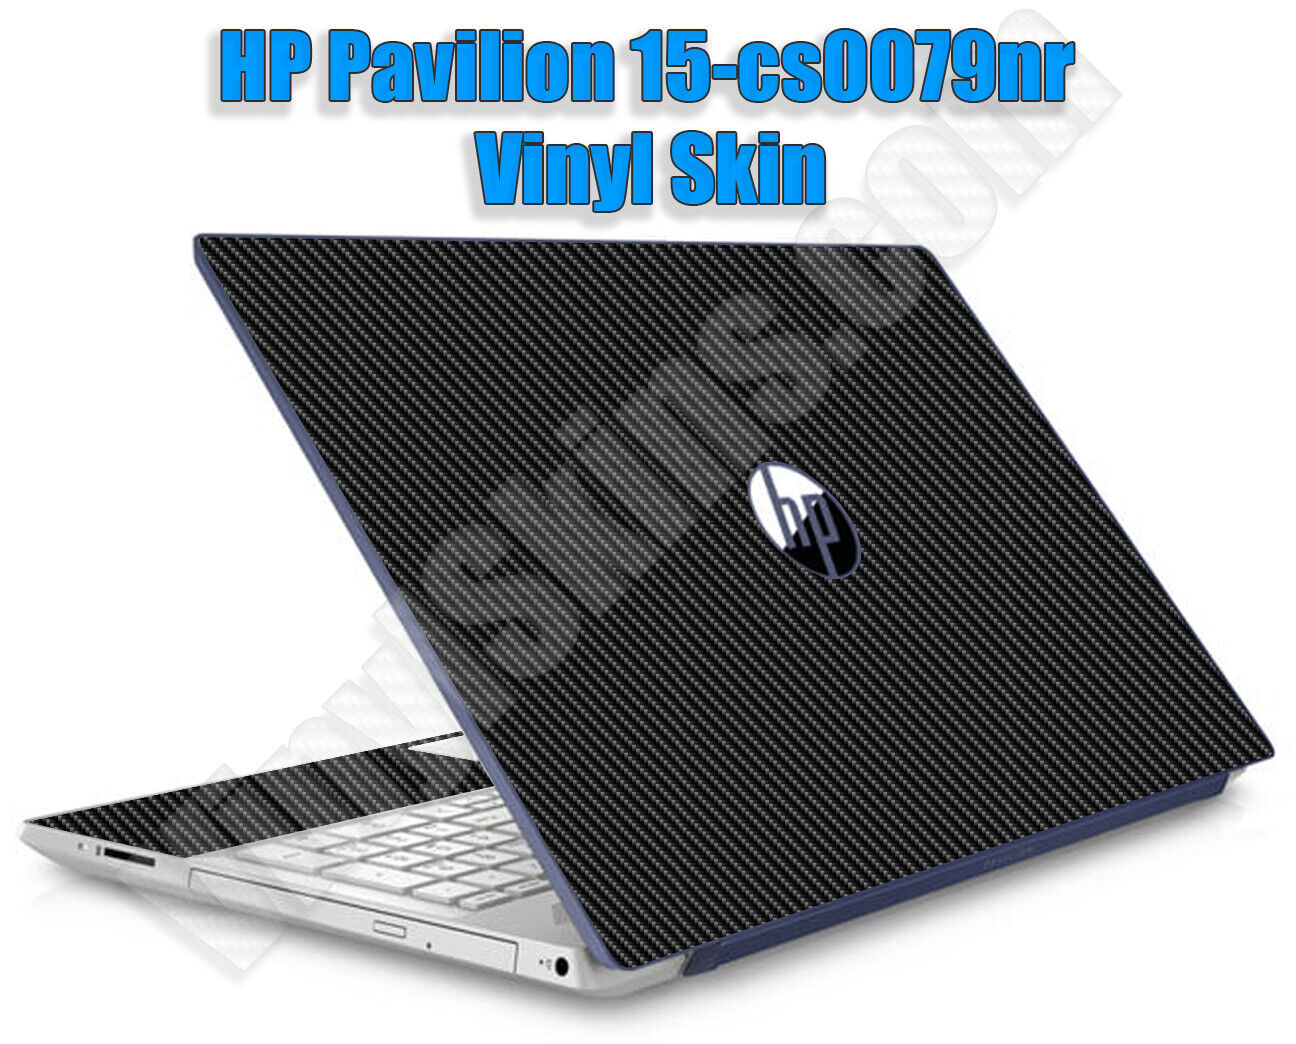 Any 1 Vinyl Skin / Decal for the HP Pavilion 15-cs0079nr - Free US Shipping